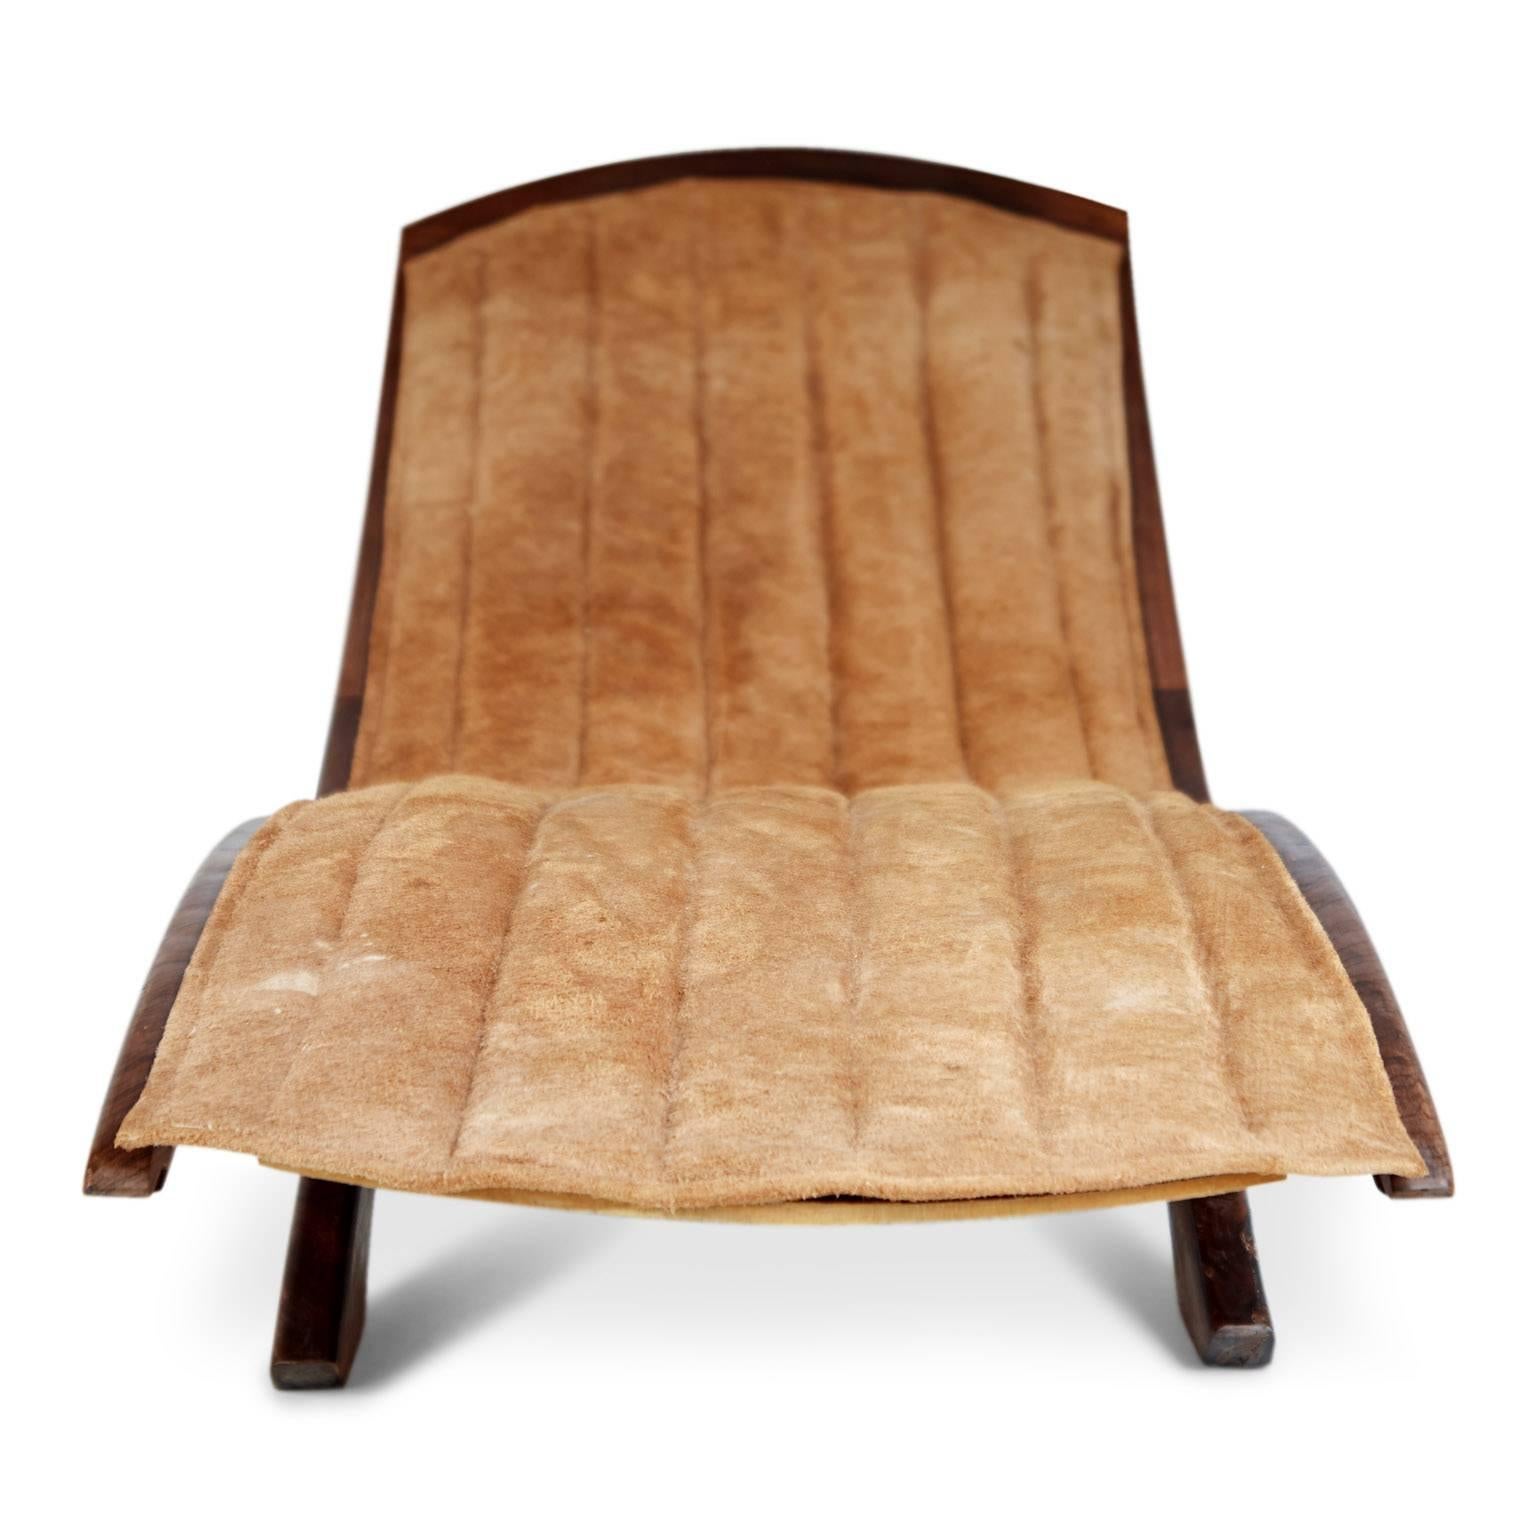 Mid-Century Modern Brazilian Rosewood and Suede Lounger or Daybed, circa 1960